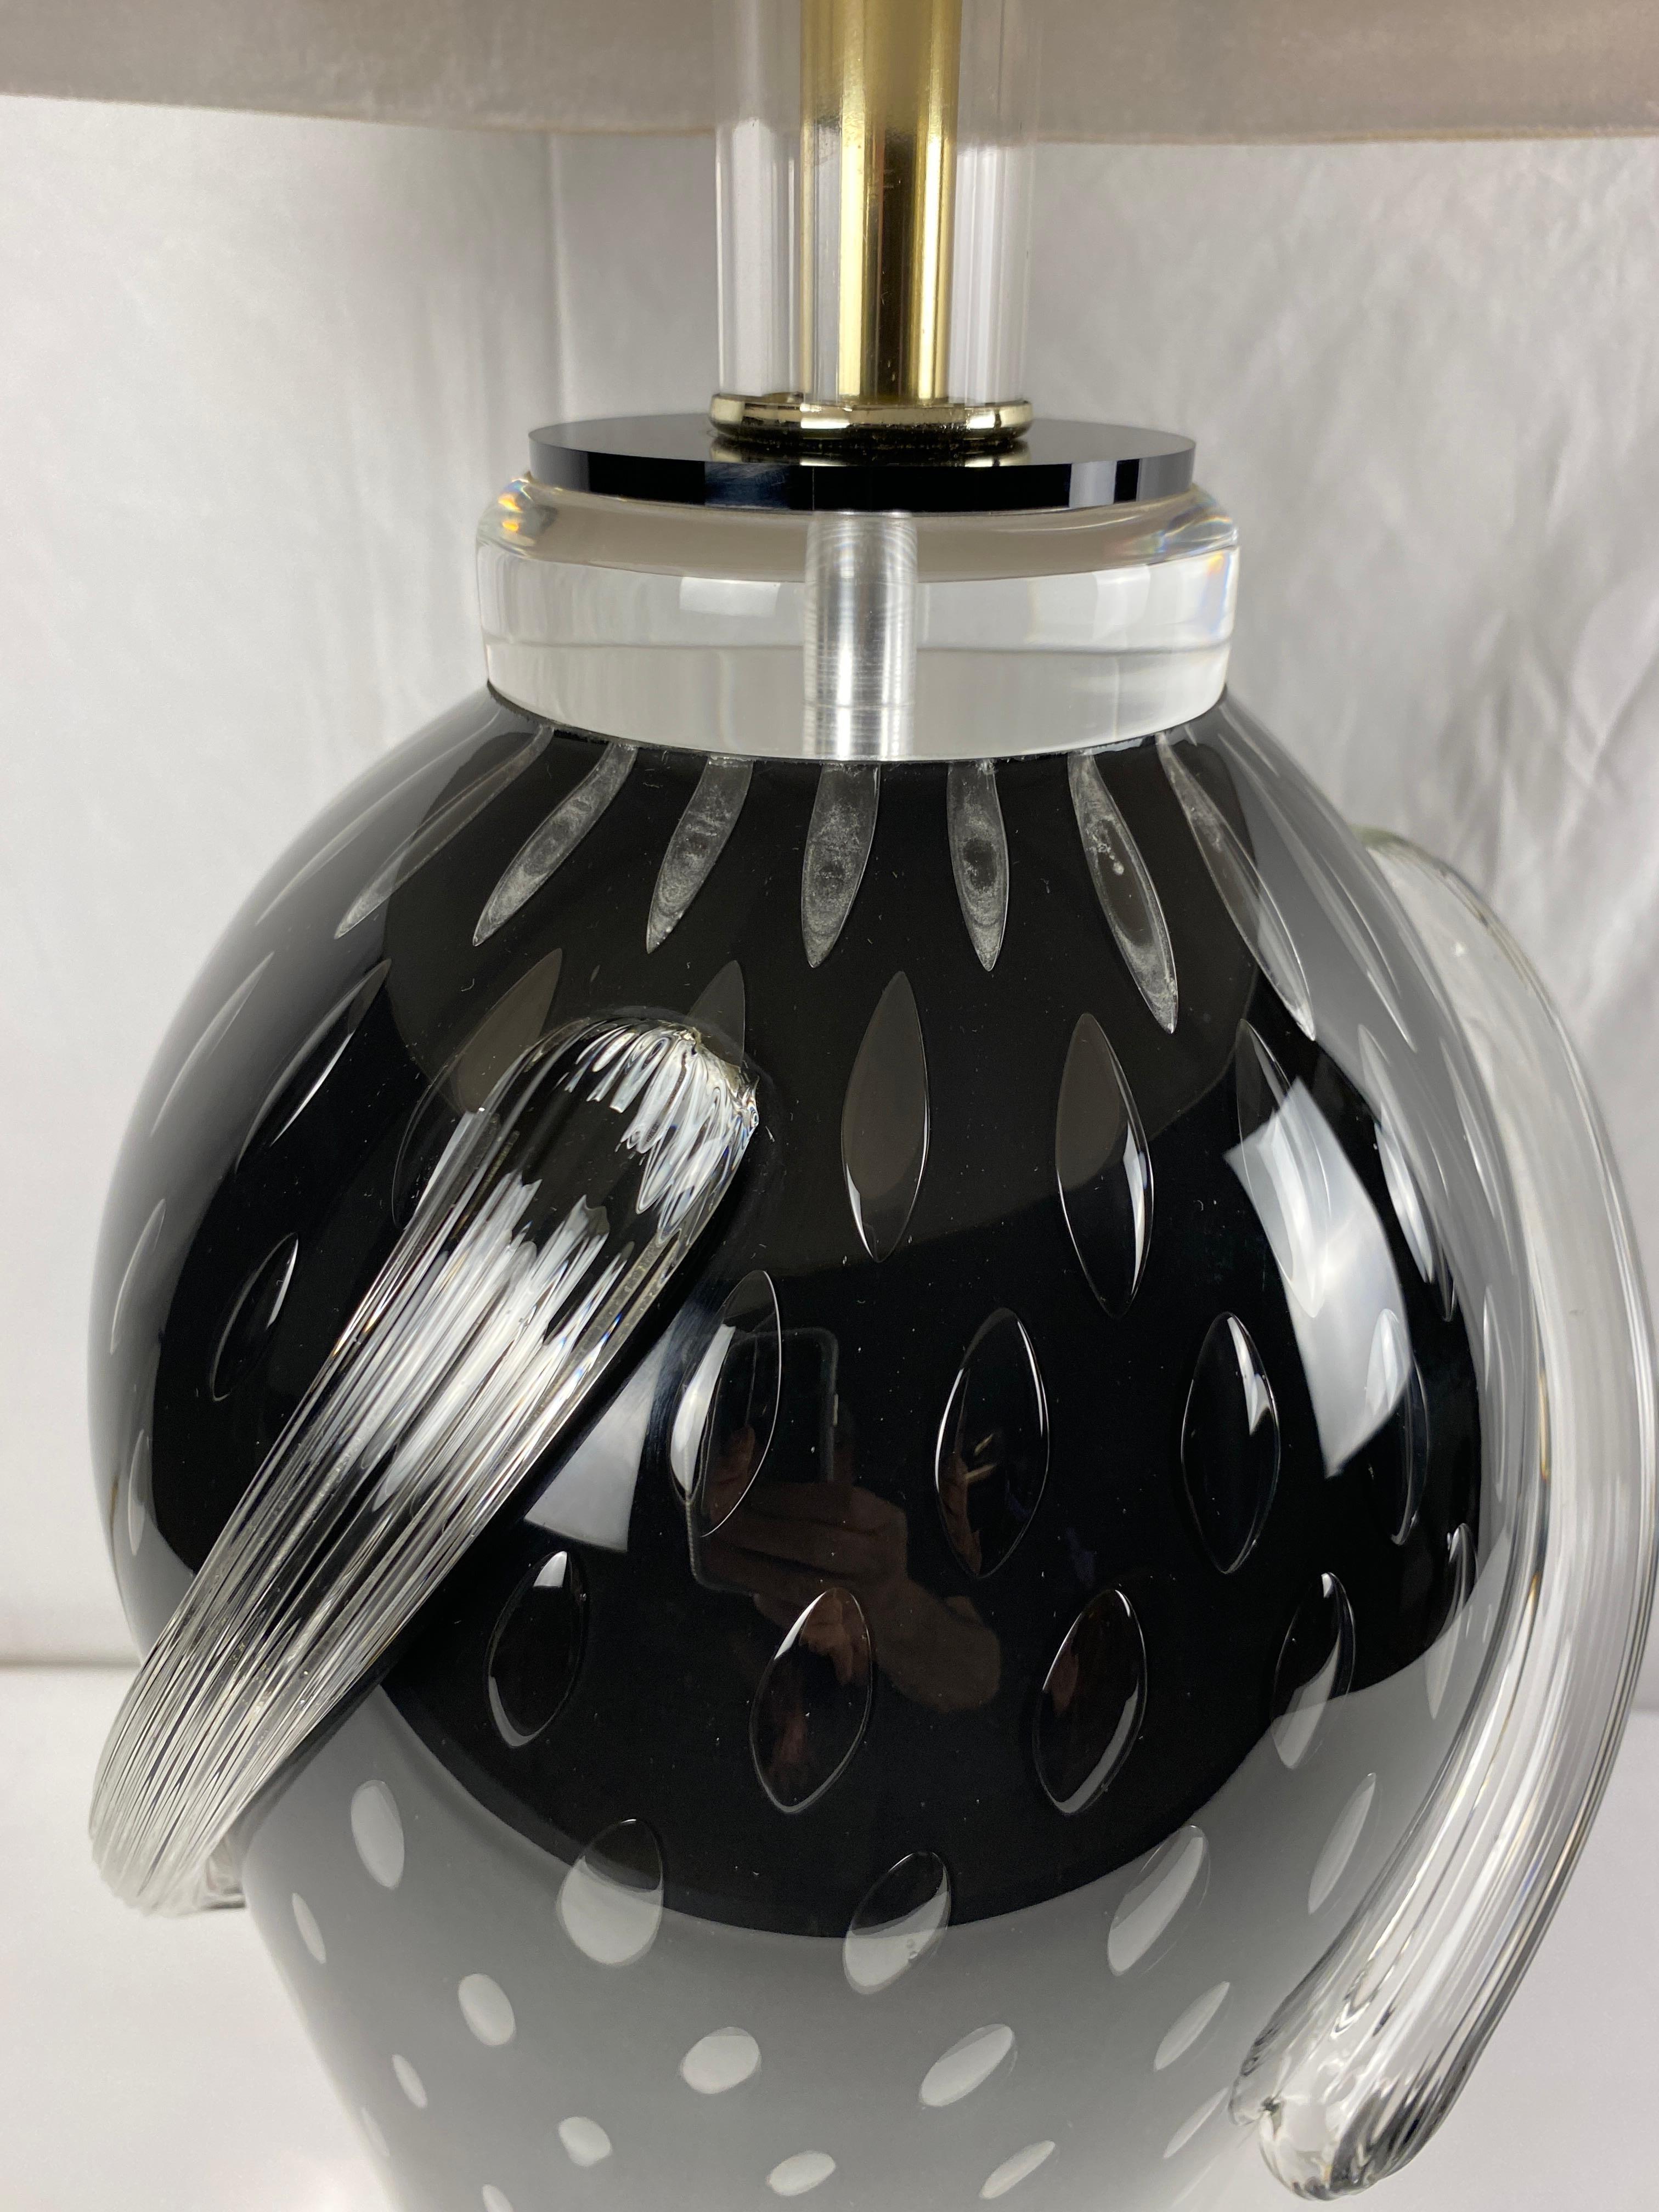 An exceptionally beautiful Murano blown art glass vessel as a custom-made lamp. Fabulous form with a stunning range of color. This lamp has been painstakingly designed using components of only the finest quality. 

Unique and in perfect condition.